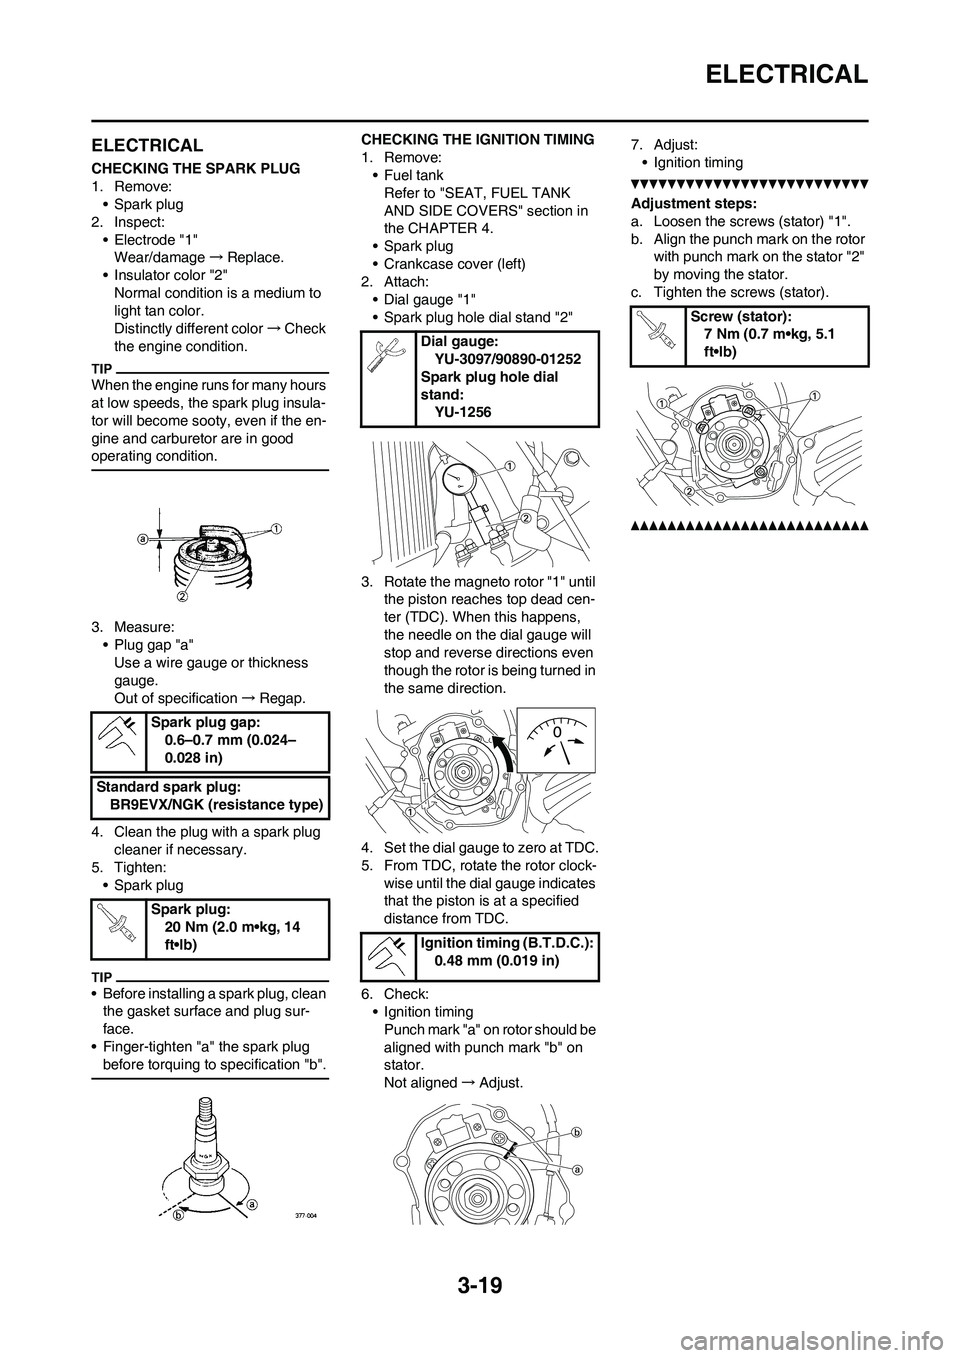 YAMAHA YZ125LC 2010  Owners Manual 3-19
ELECTRICAL
ELECTRICAL
CHECKING THE SPARK PLUG
1. Remove:
• Spark plug
2. Inspect:
• Electrode "1"
Wear/damage→Replace.
• Insulator color "2"
Normal condition is a medium to 
light tan col